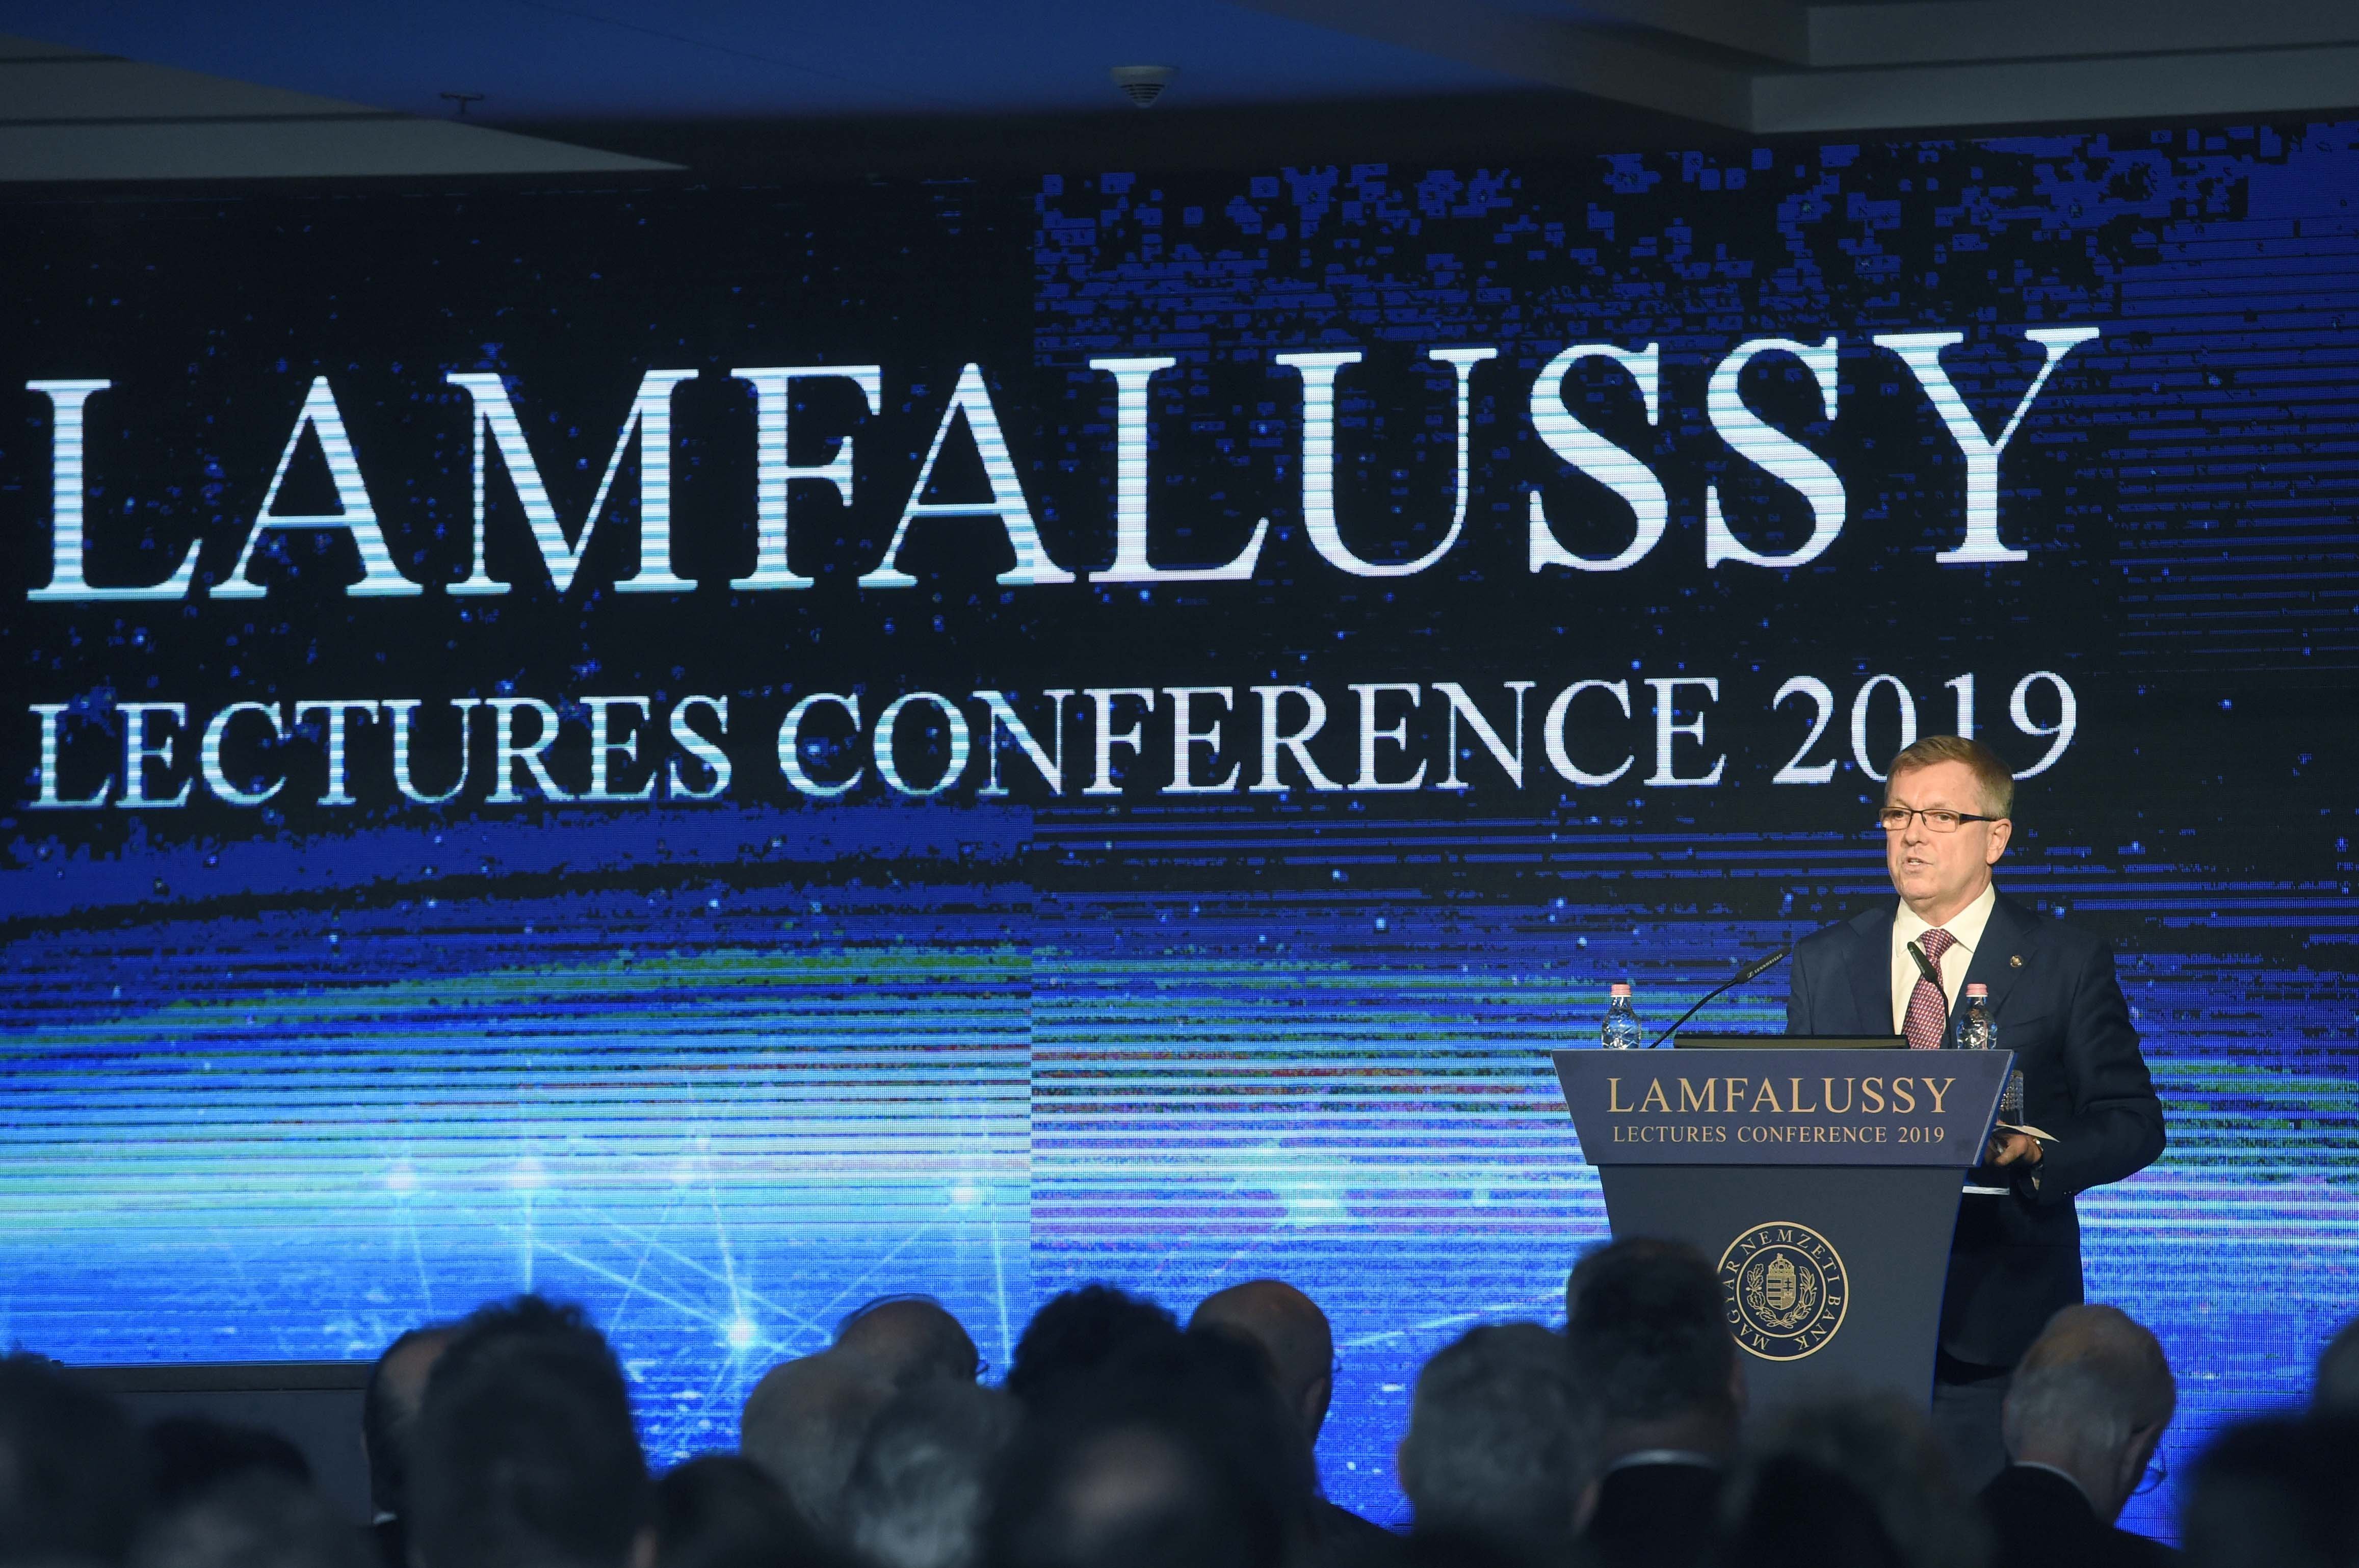 Lámfalussy Lectures